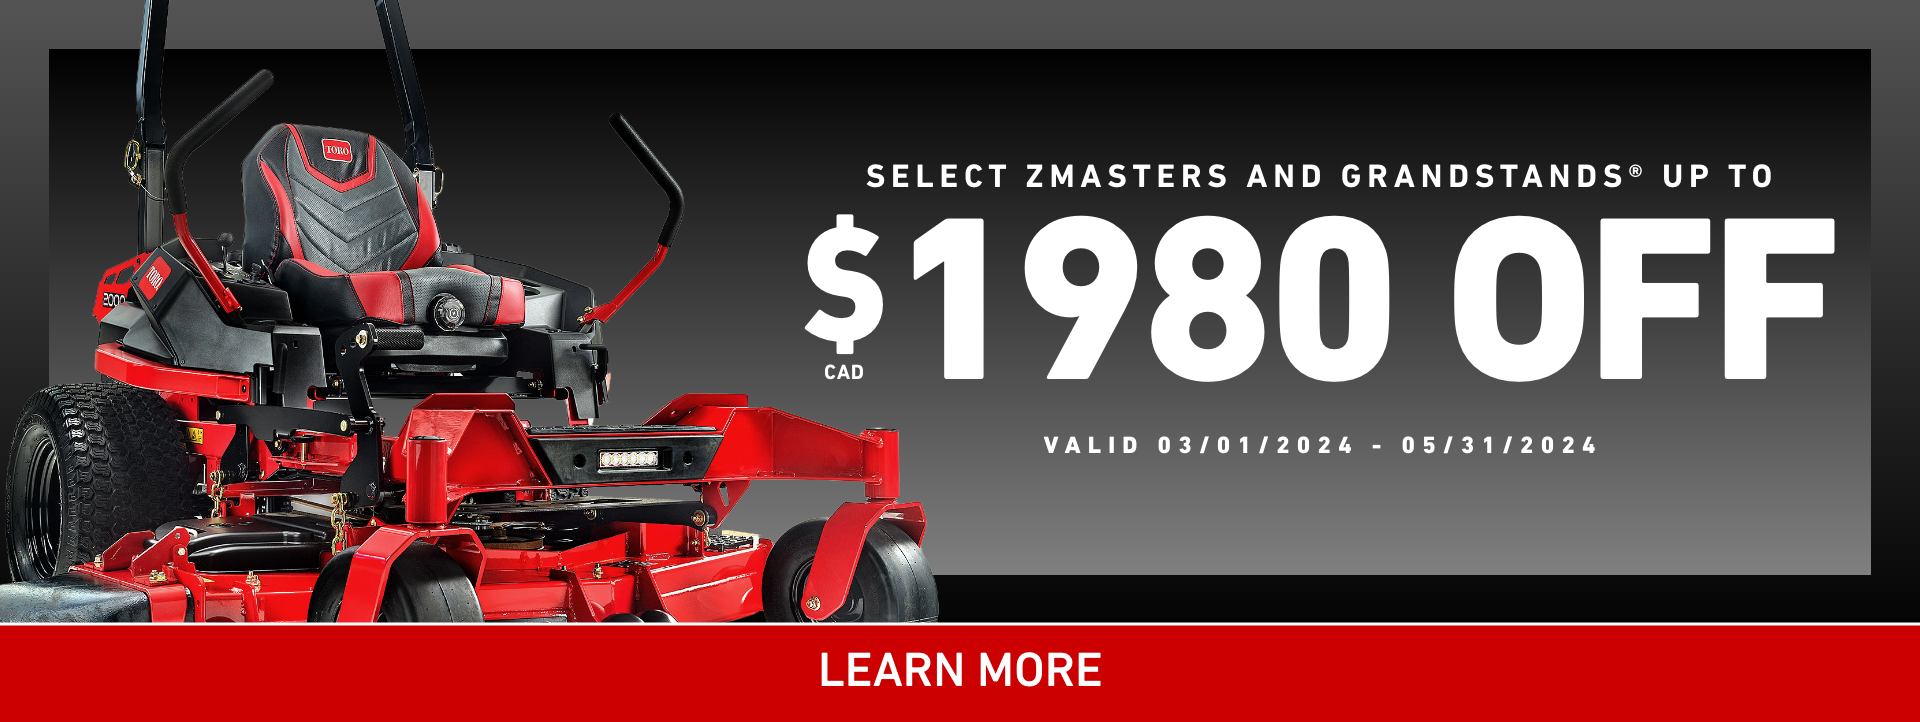 $1,980 off select Z Masters and GrandStand Mowers valid March 1, 2024 to May 31, 2024